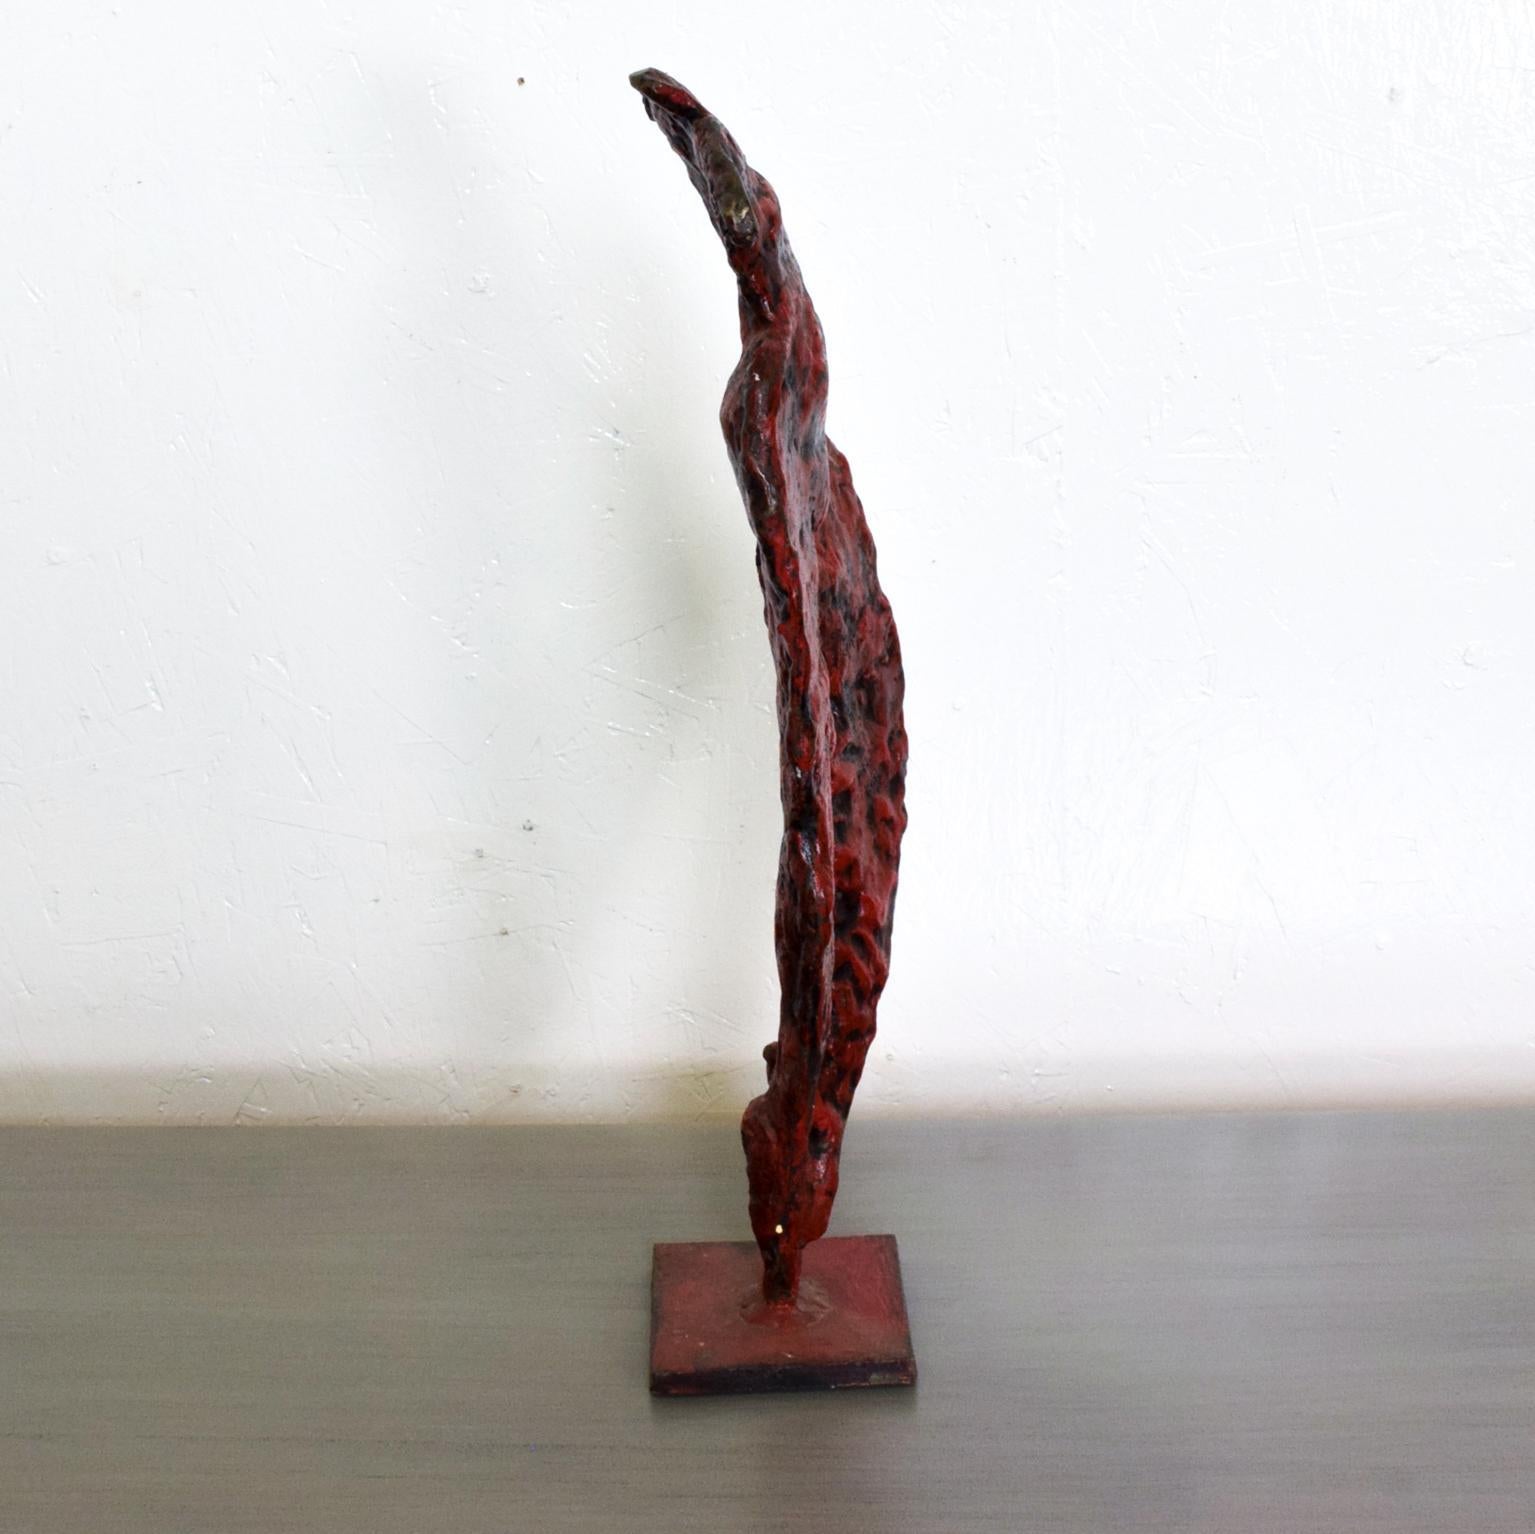 For your consideration, a Mid-Century Modern bronze nude abstract sculpture, Giacometti Era. Heavy, solid bronze with red and black patina. Unmarked. Dimensions: 21